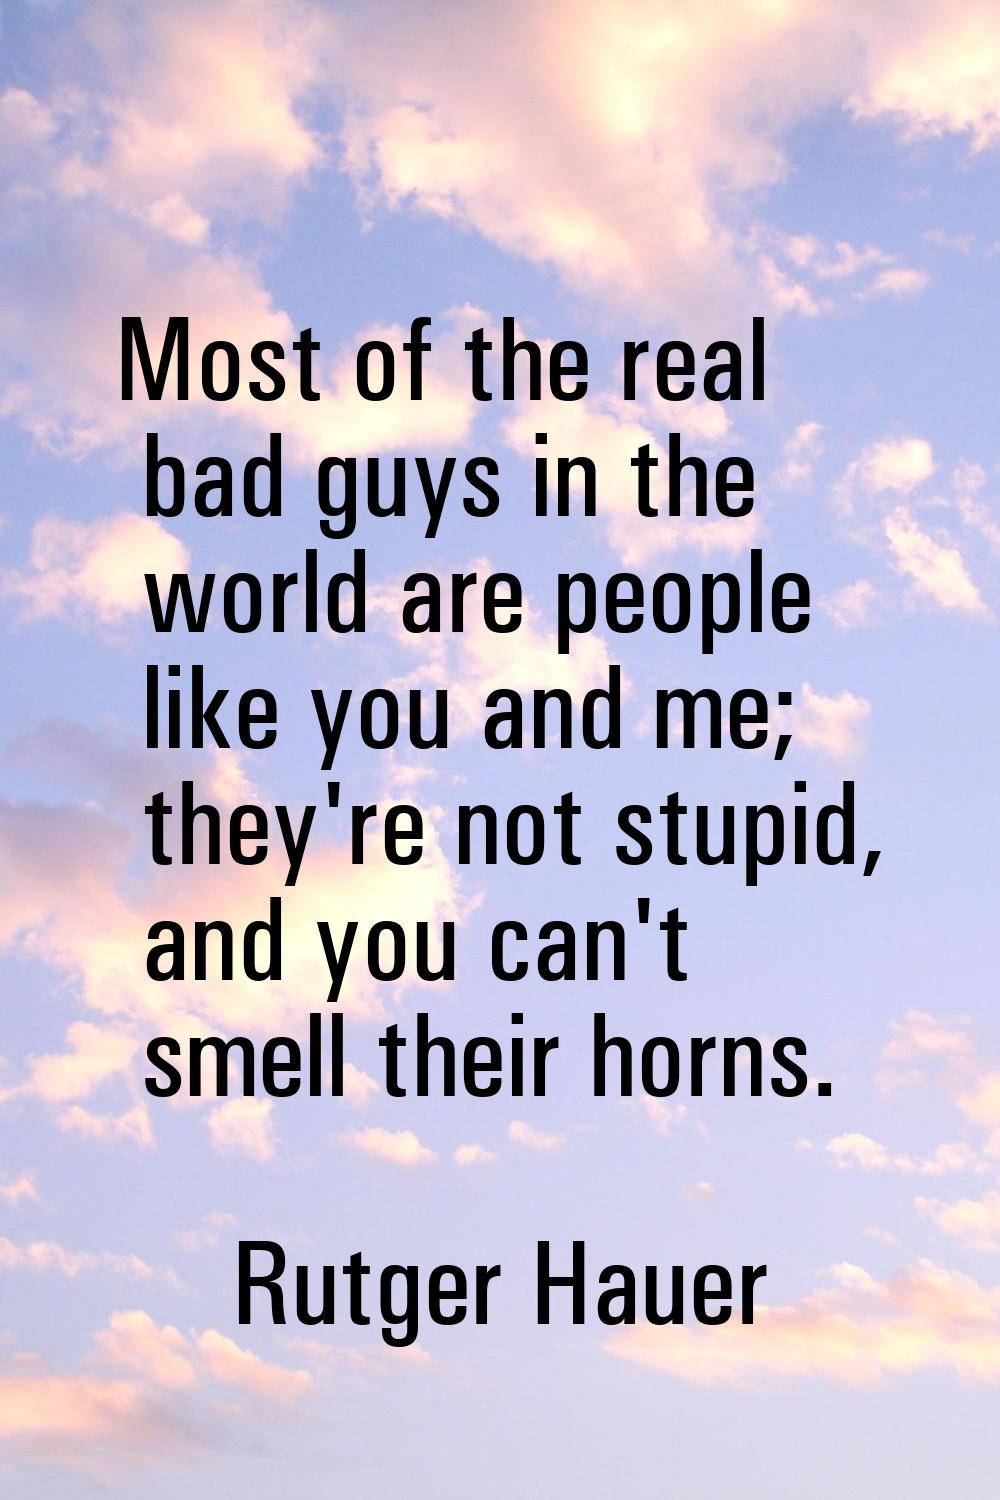 Most of the real bad guys in the world are people like you and me; they're not stupid, and you can'